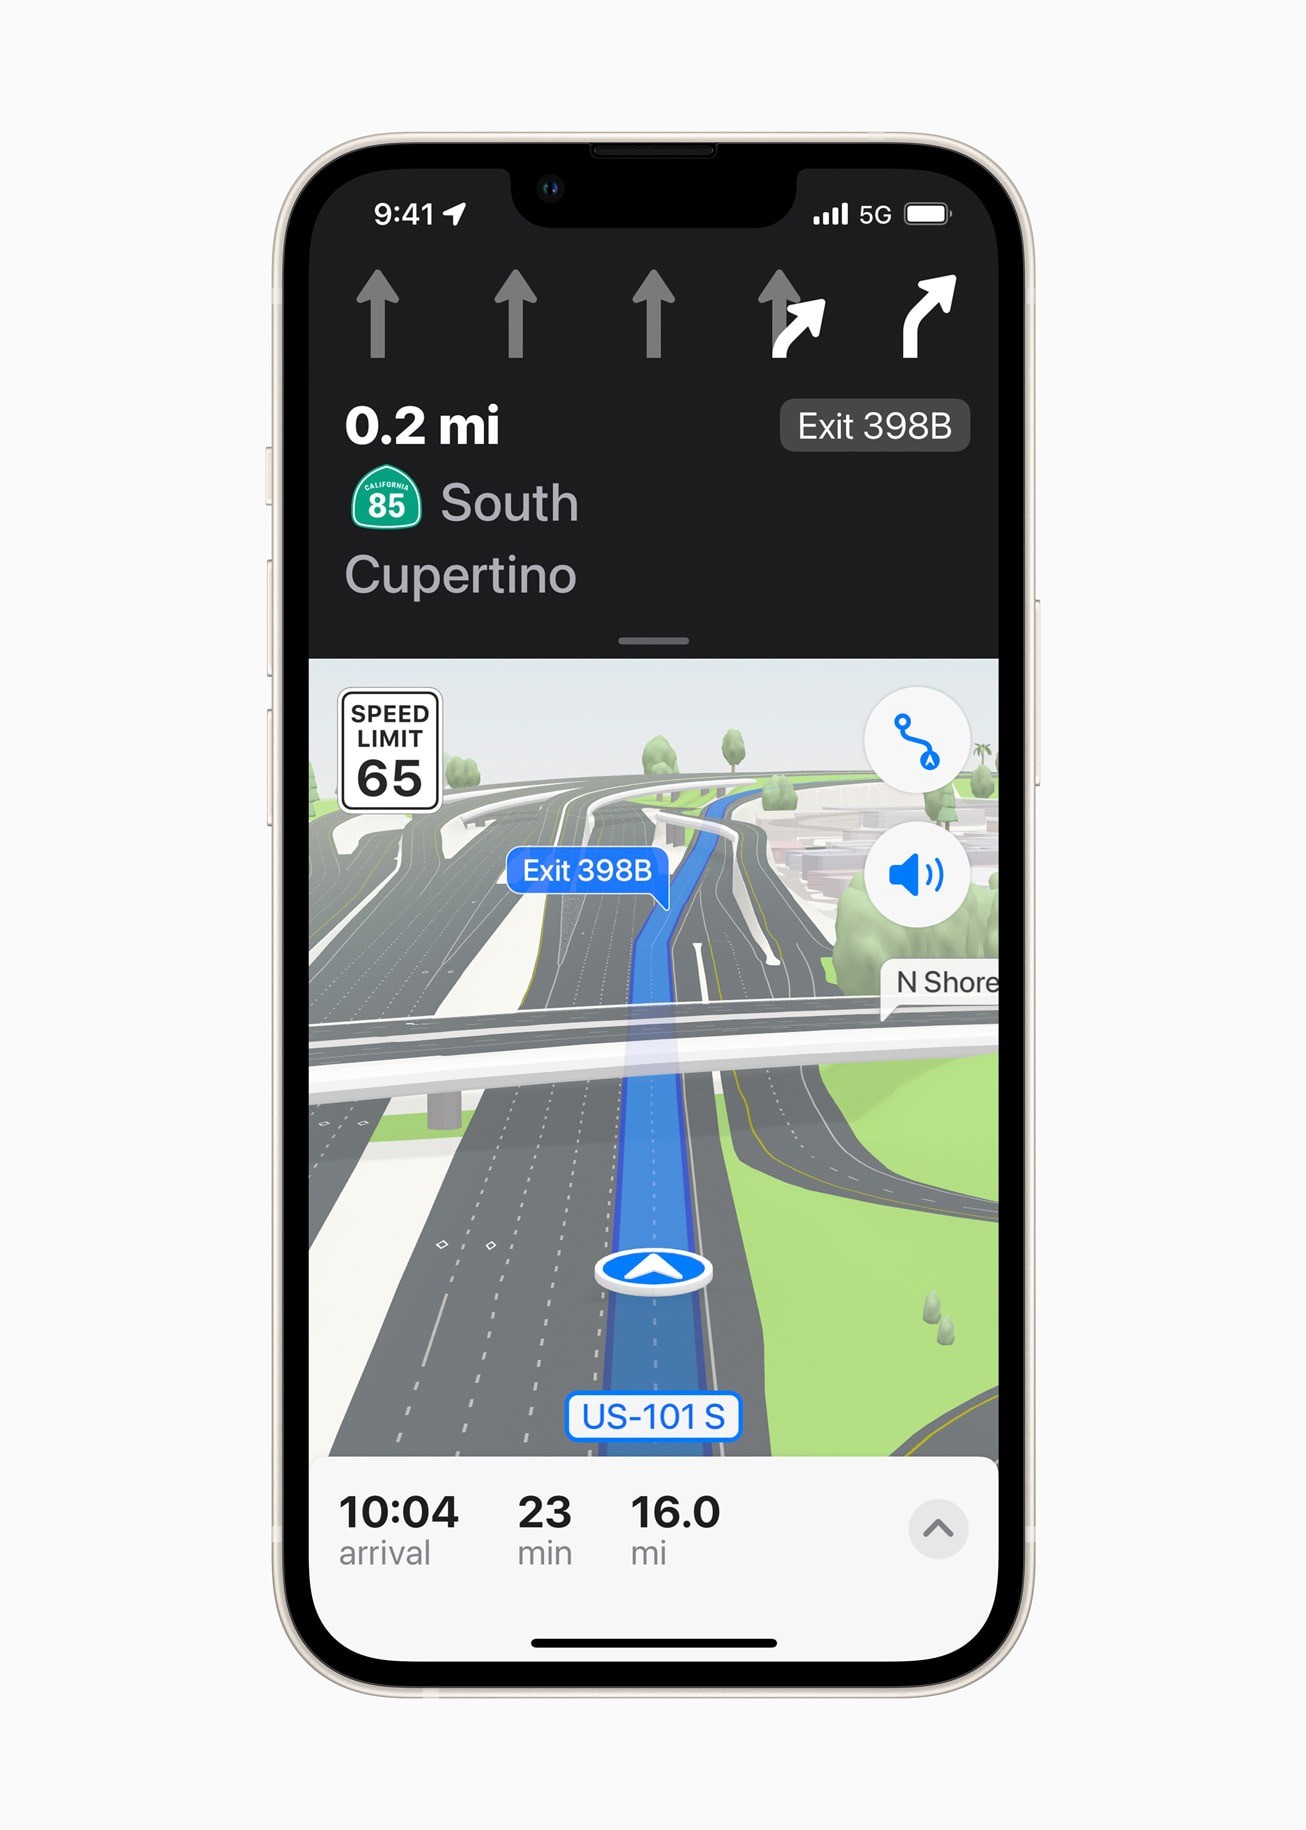 Apples Google Maps Rival Updates Its Waze Inspired Features Gets Everything Right 2 